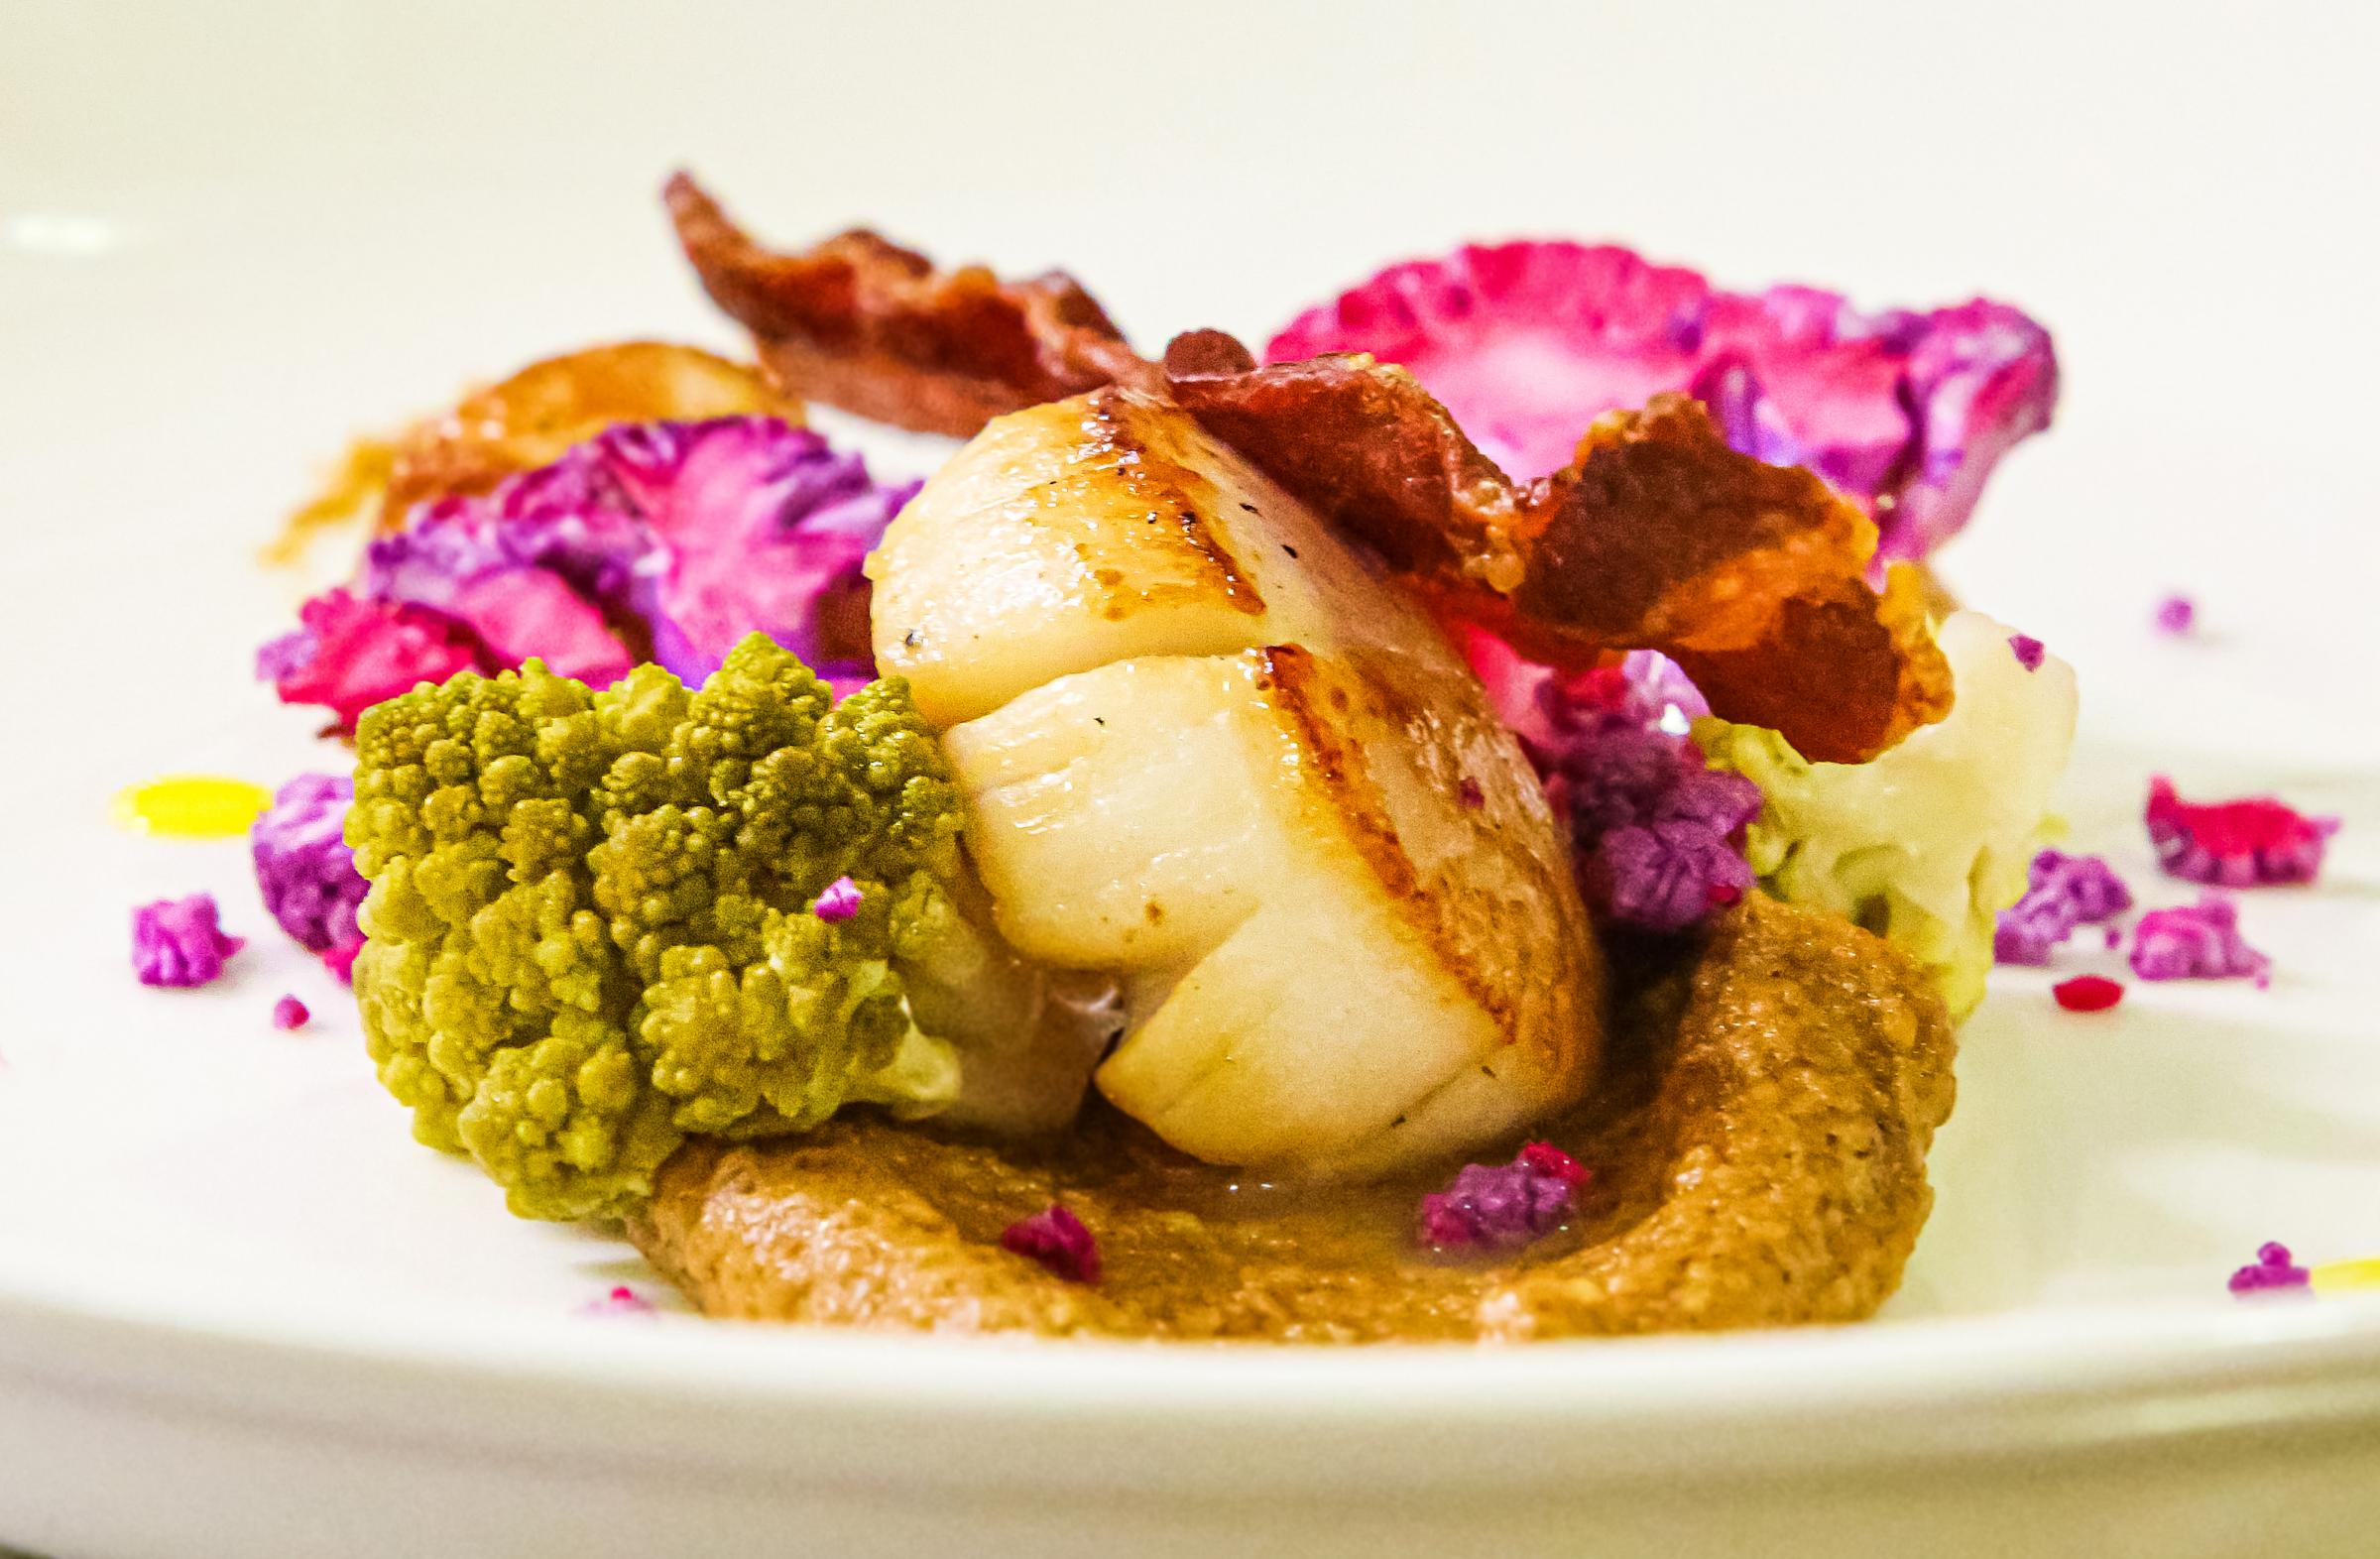 Seared king scallops, crispy bacon and textures of cauliflower from The Bridgewater Arms new menu Picture: Christine Meldon